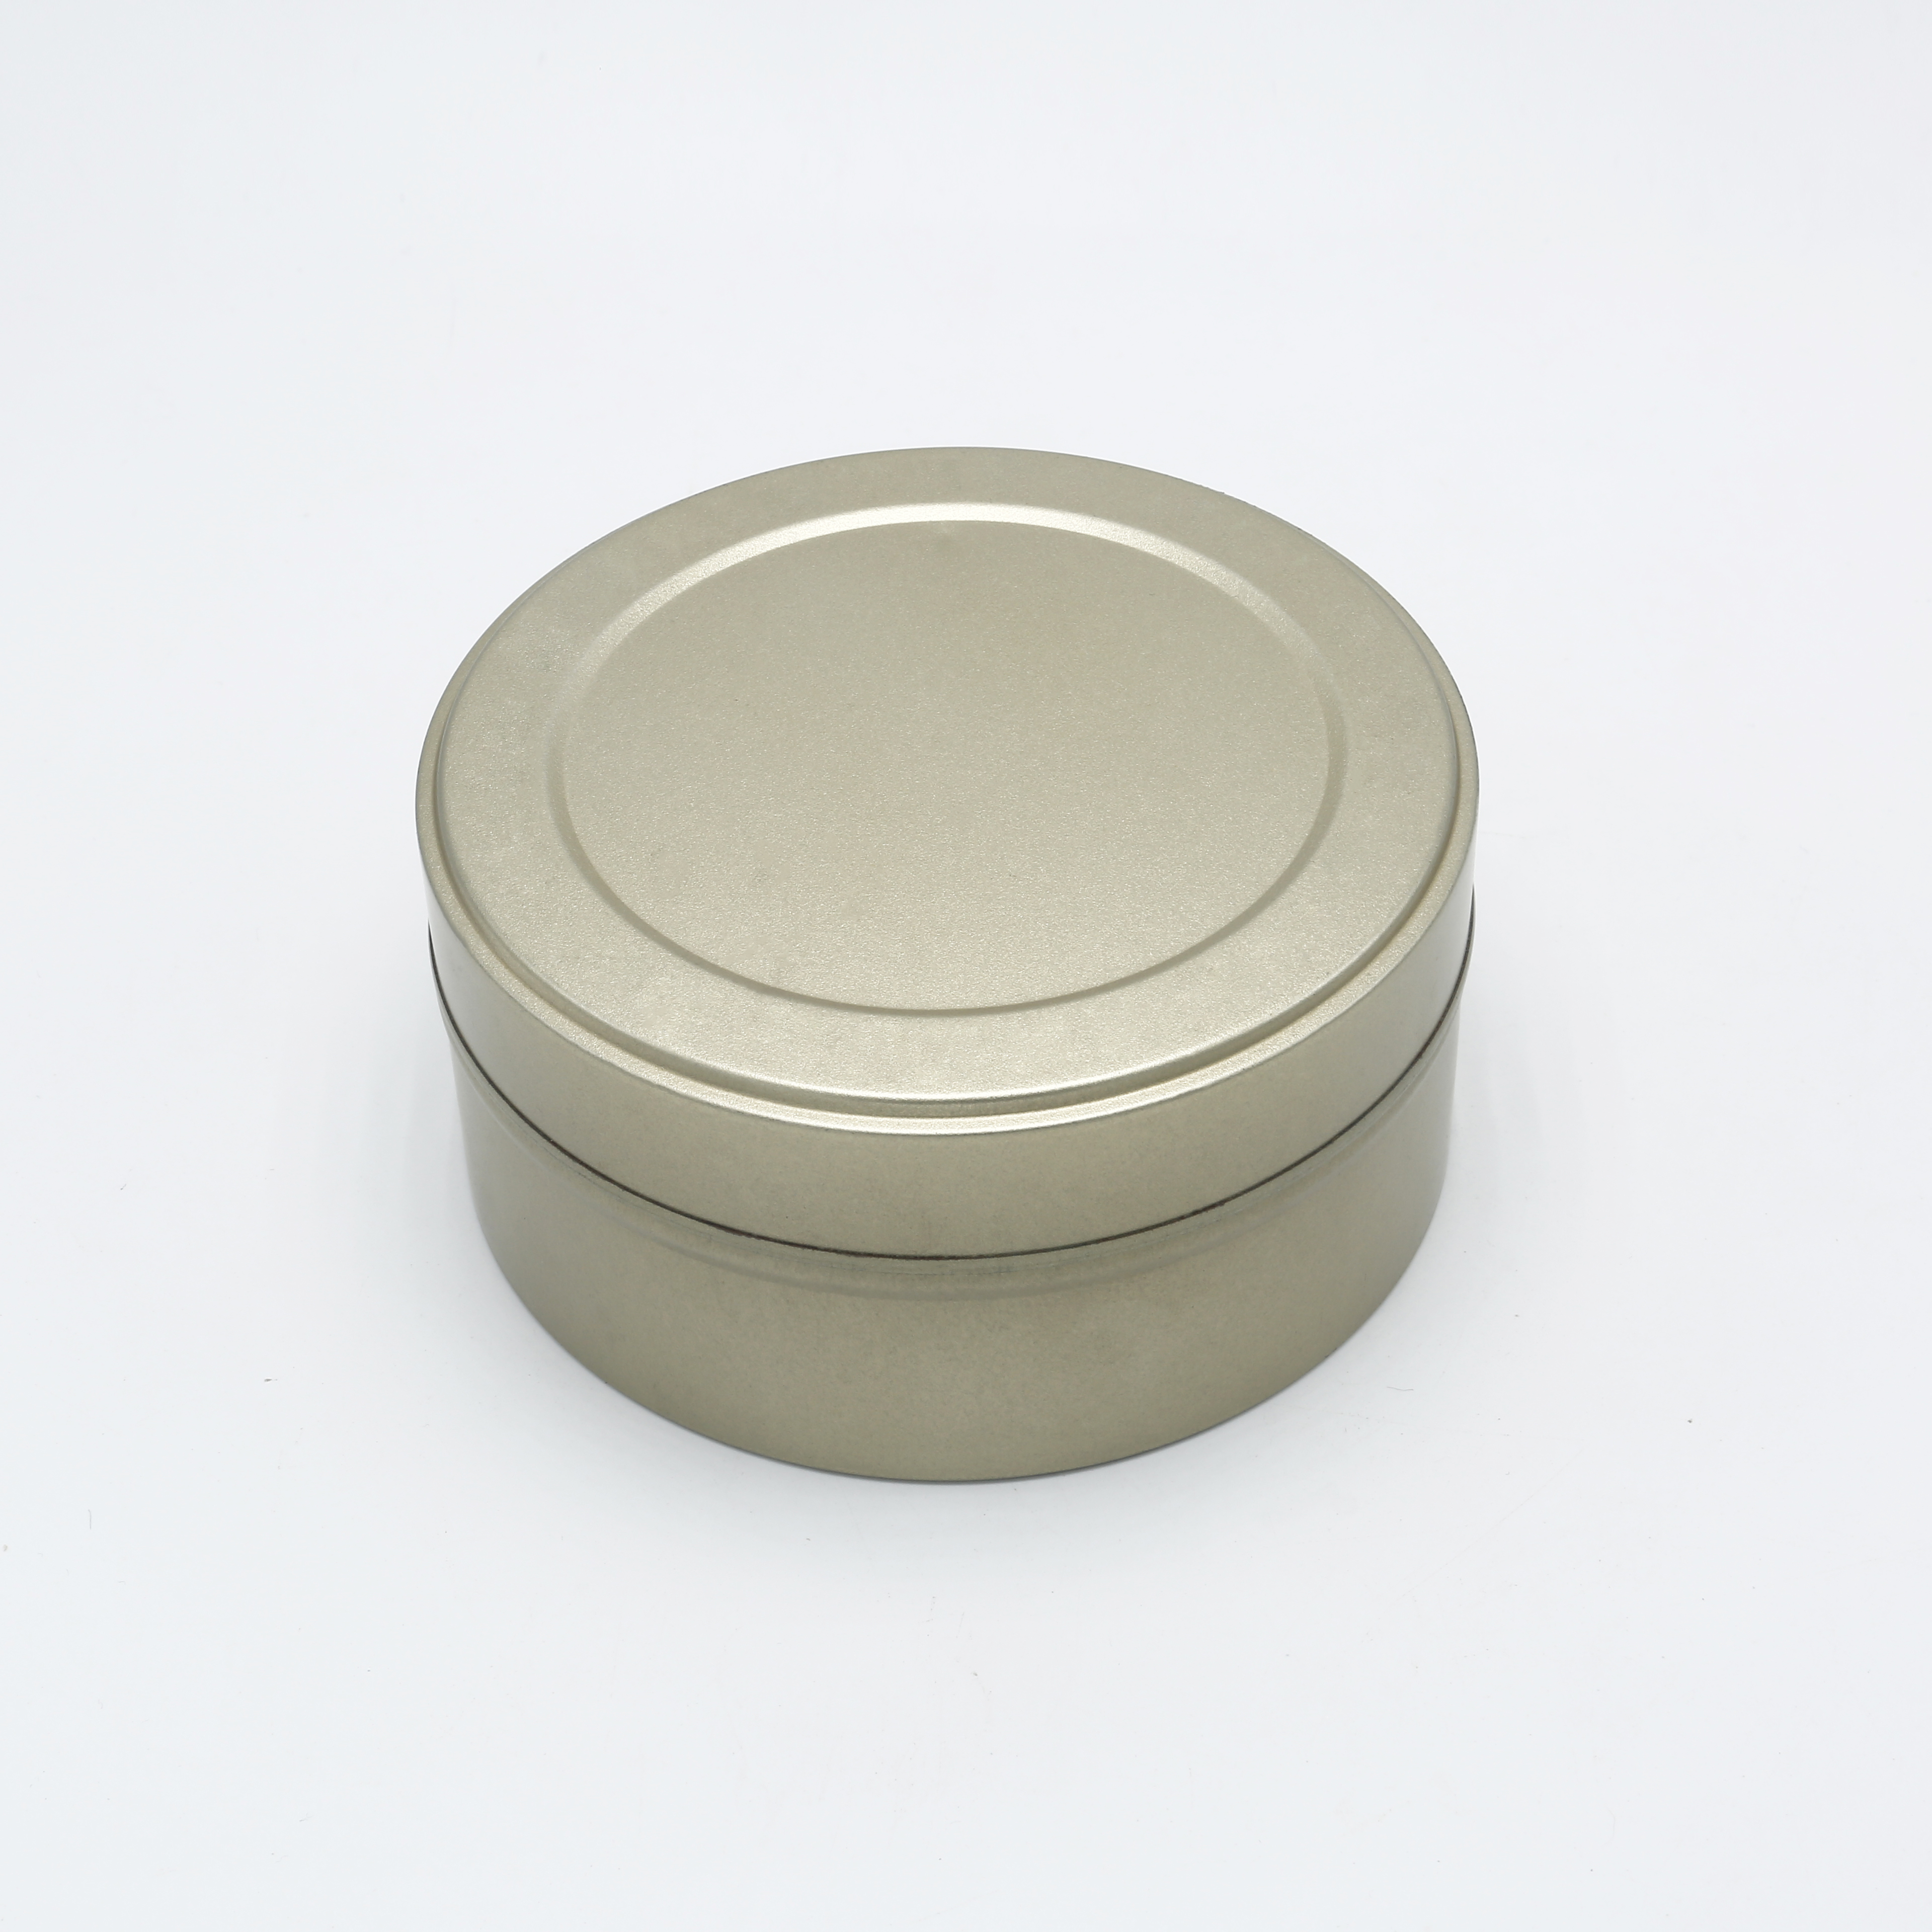 China Best Price for Toffee Tin Can - Small tin box ED1255A-01 for